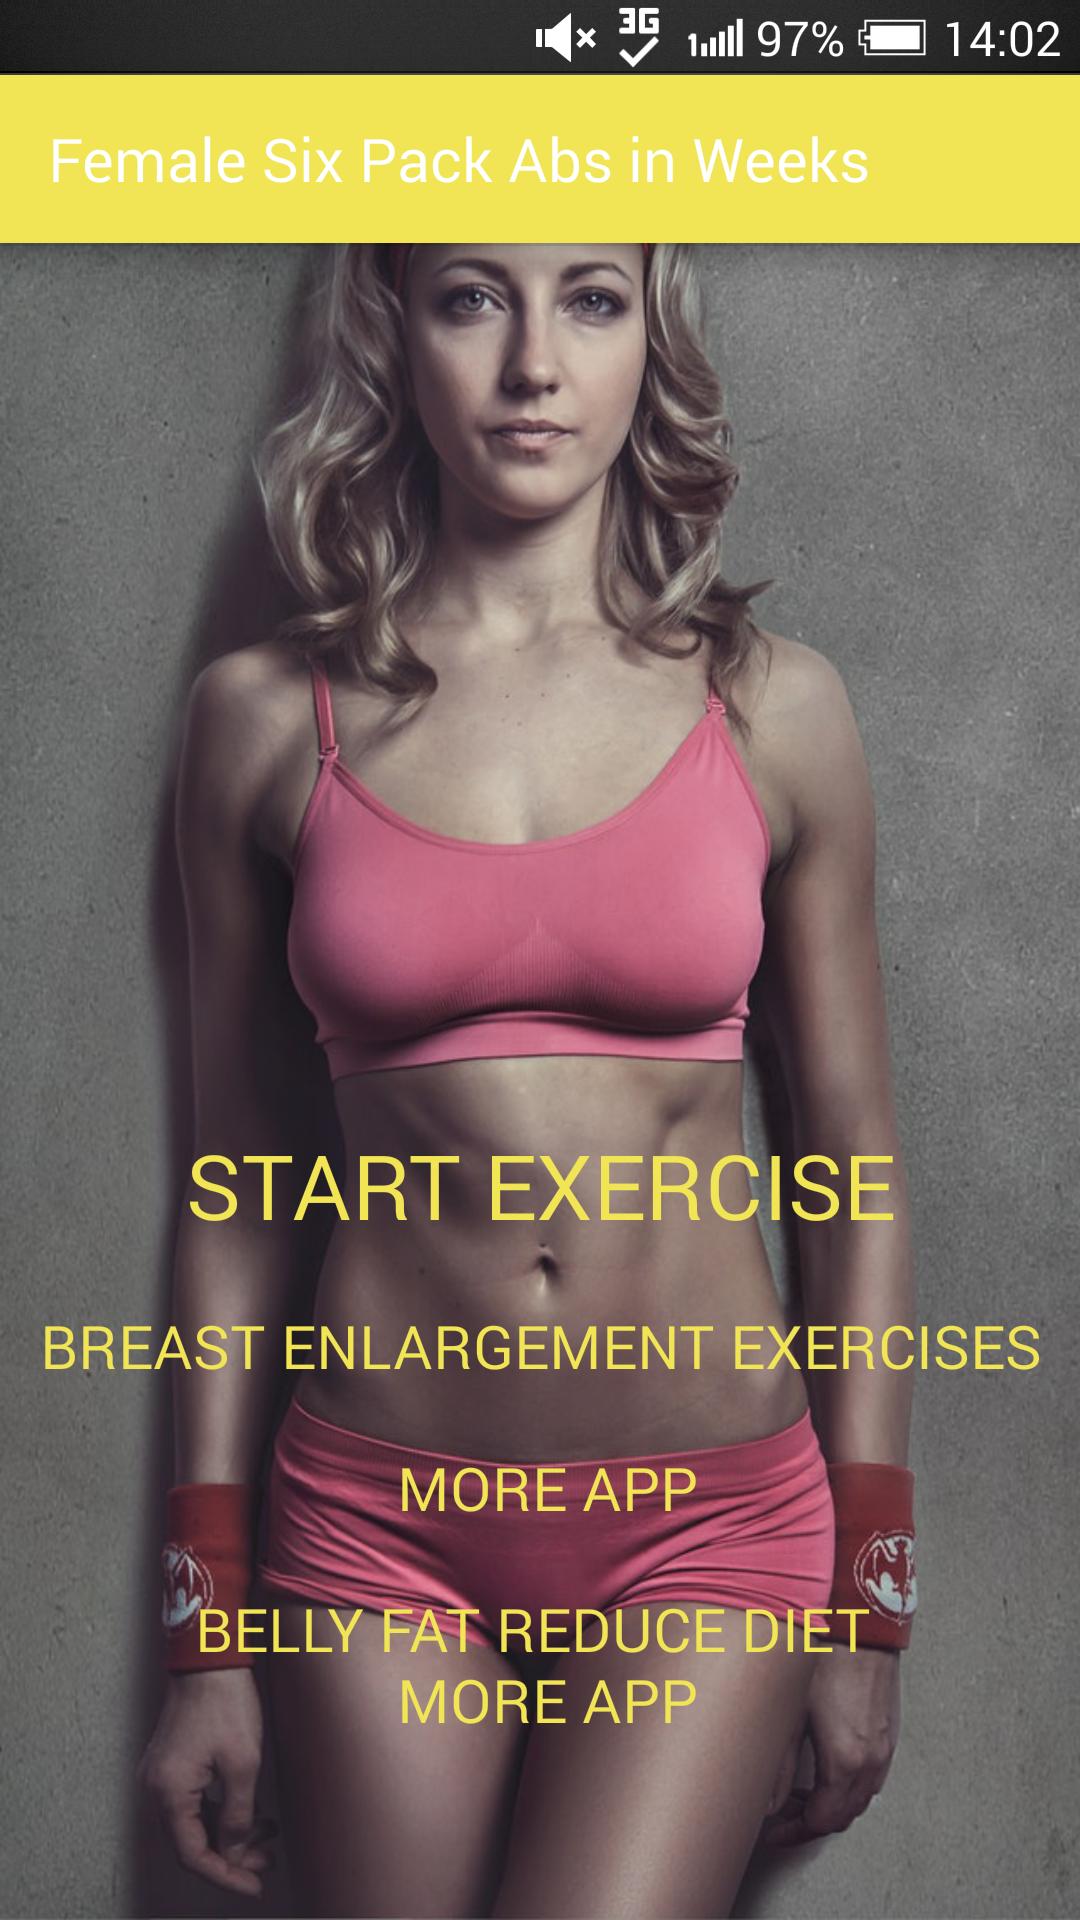 Female Six Pack Abs in Weeks for Android - APK Download